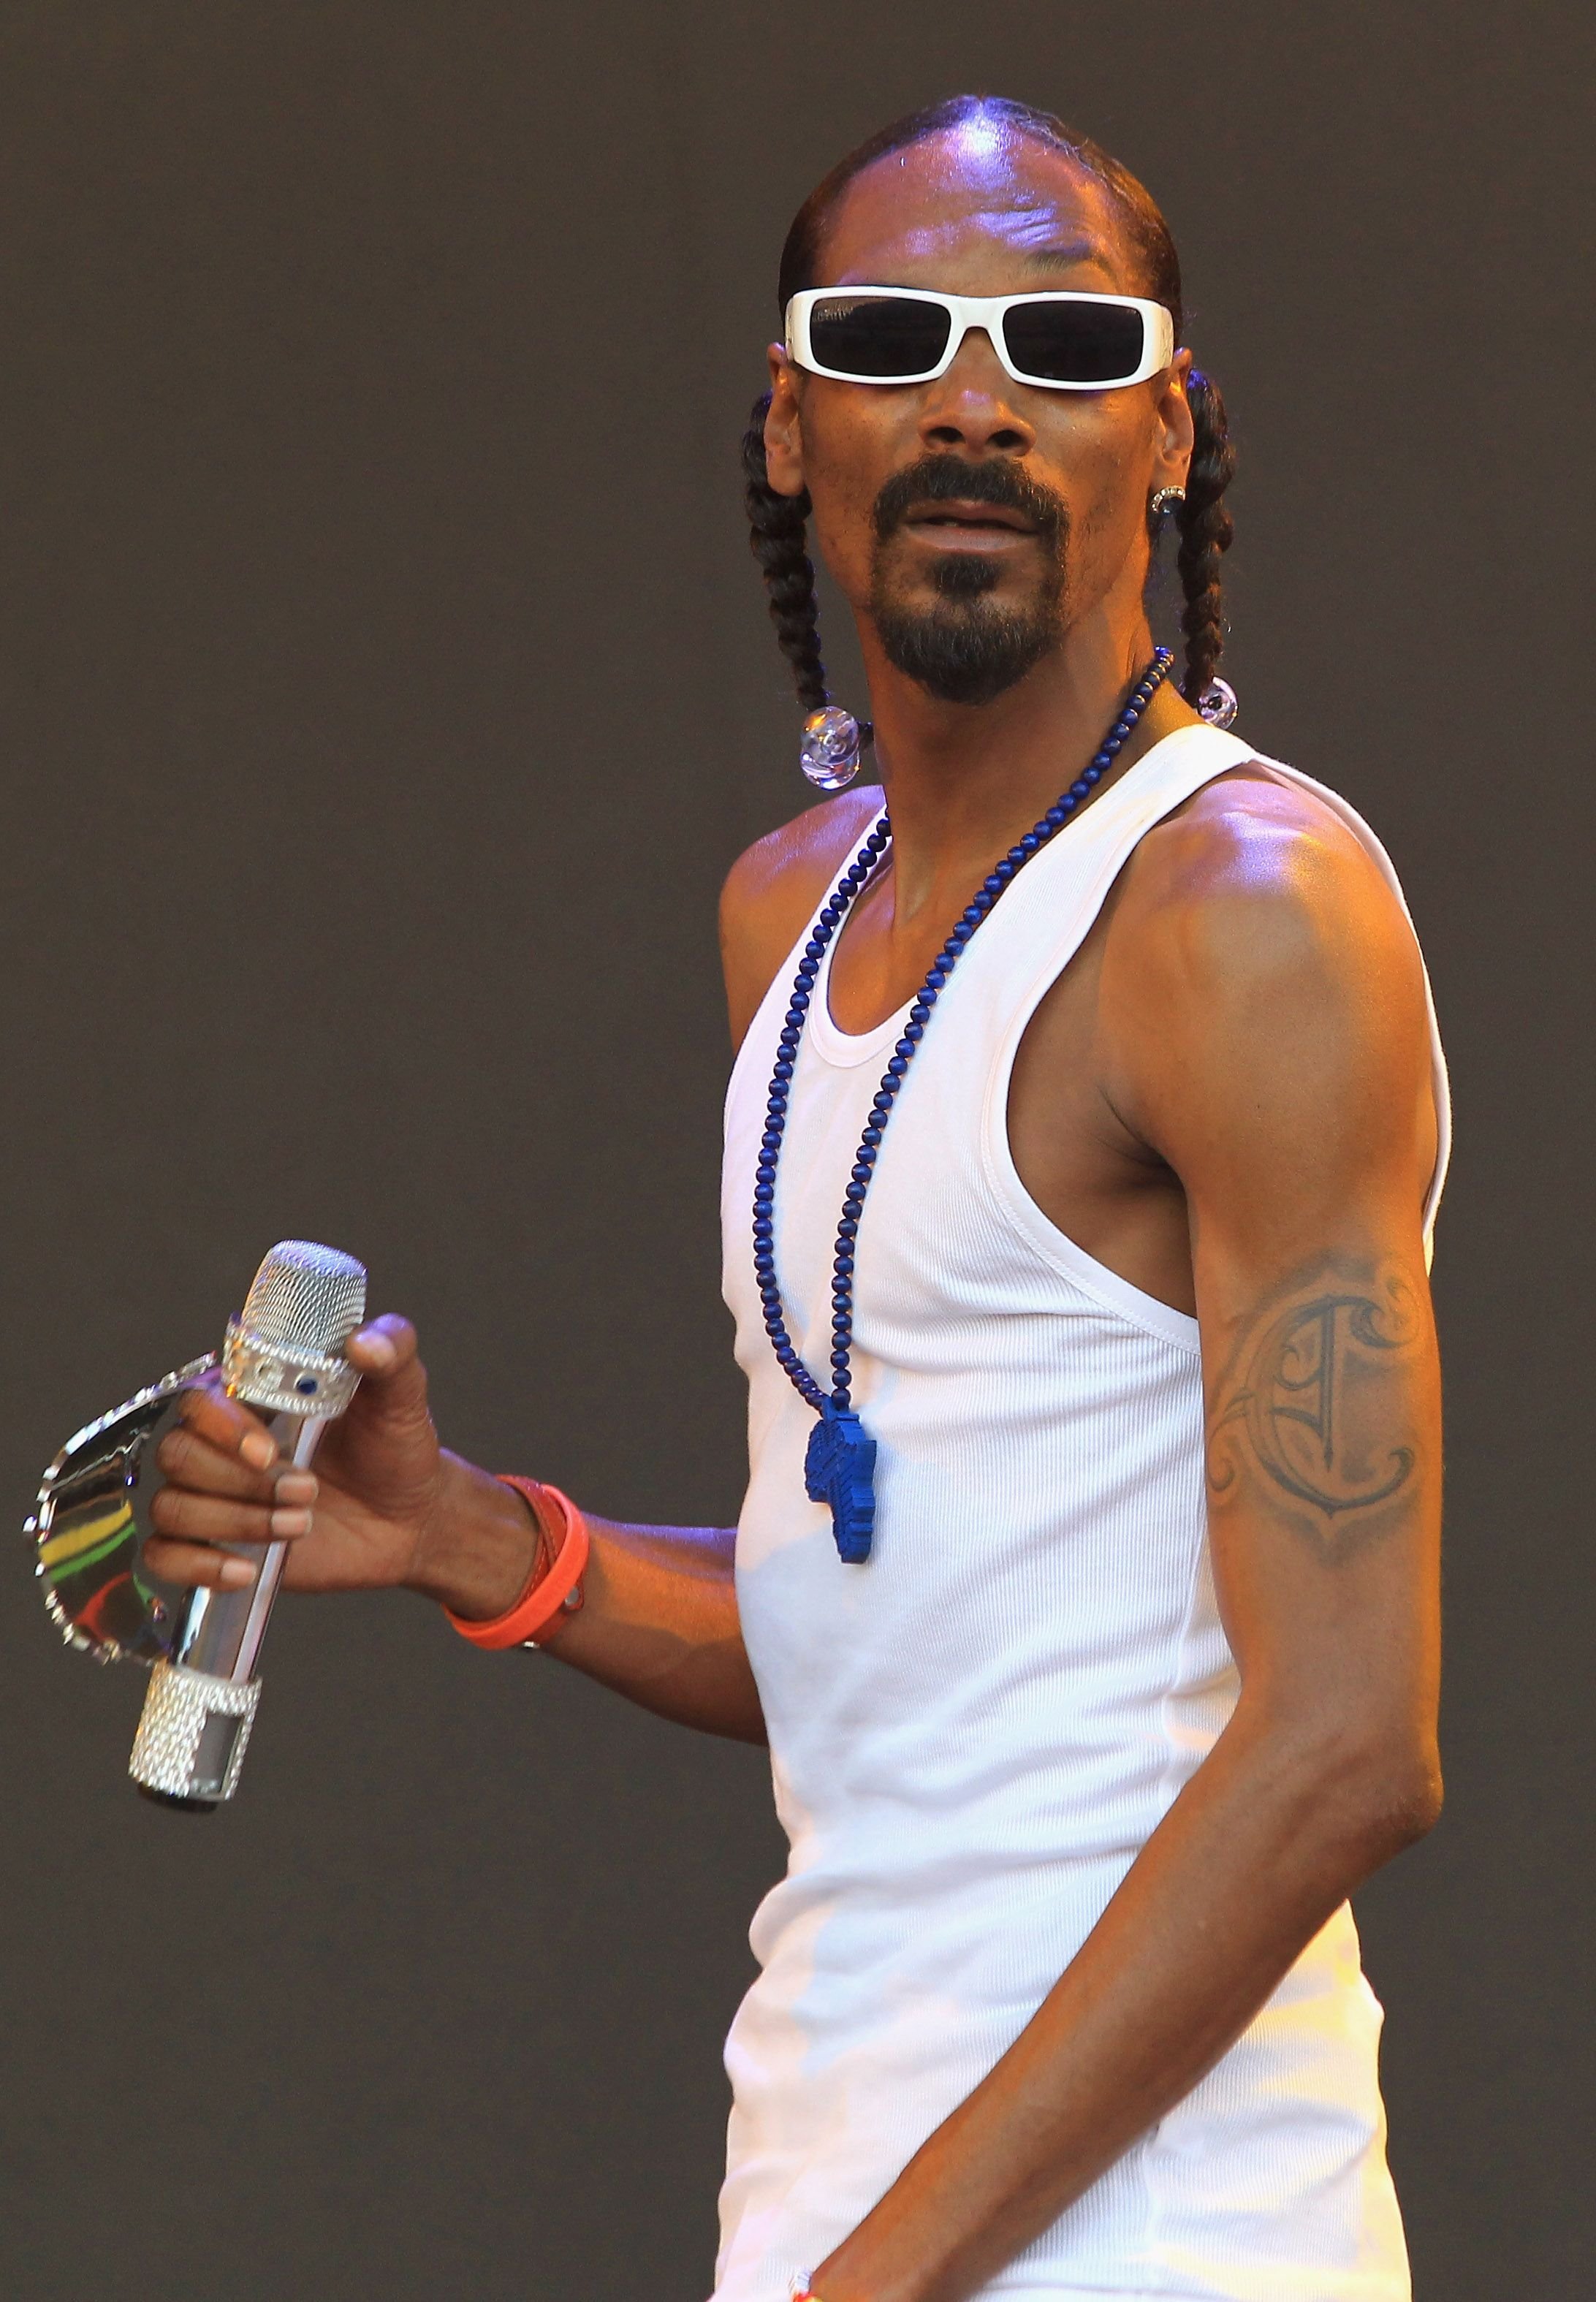  Snoop Dogg at Worthy Farm performing at the Glastonbury Festival on June 25, 2010 in England. | Photo: Getty Images